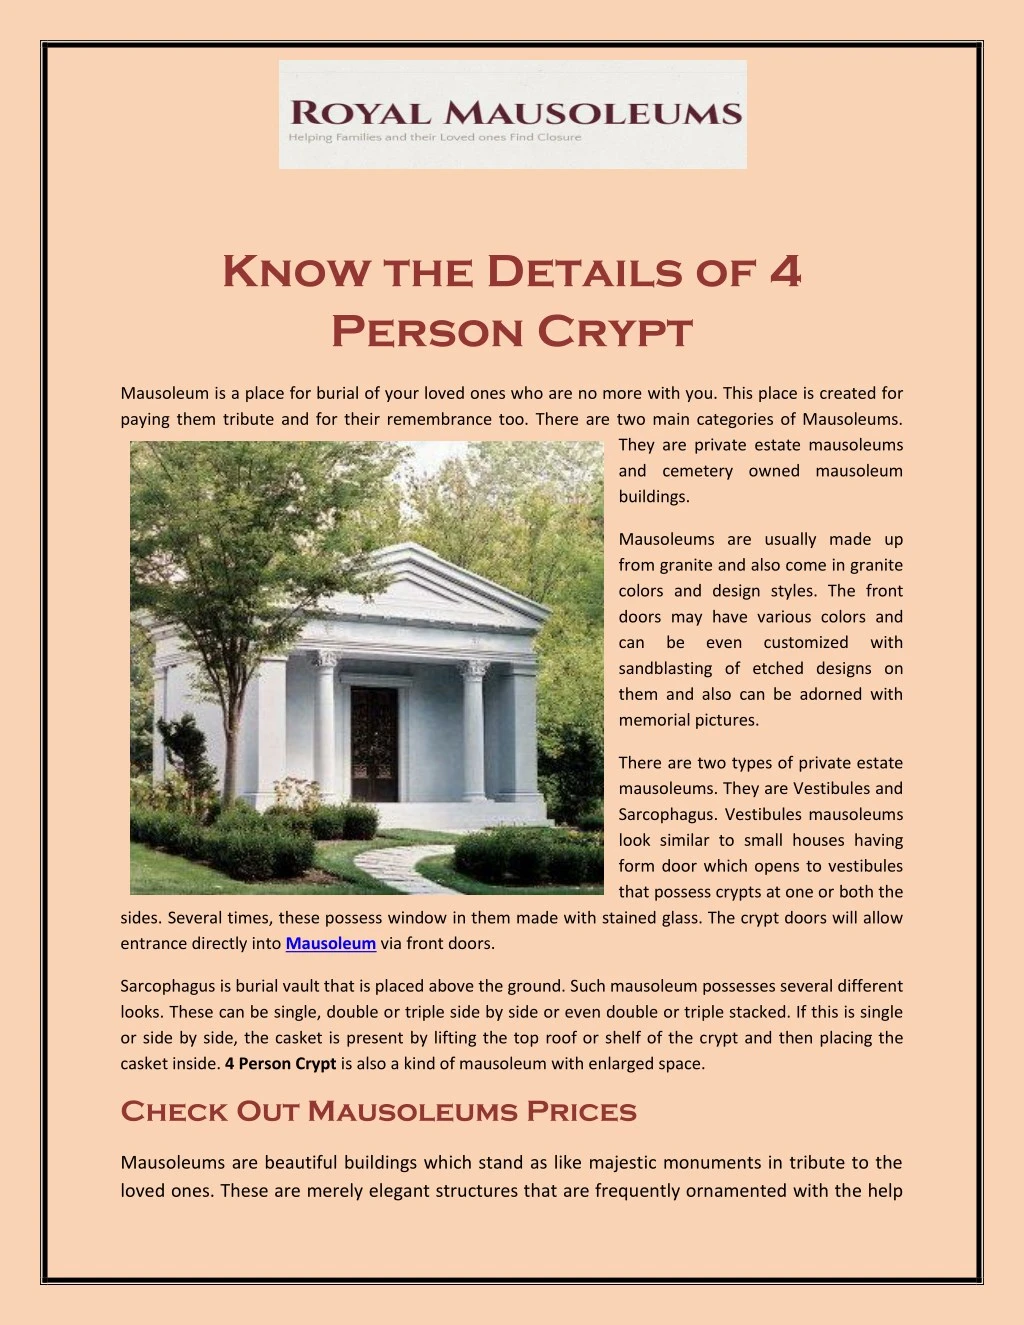 know the details of 4 person crypt